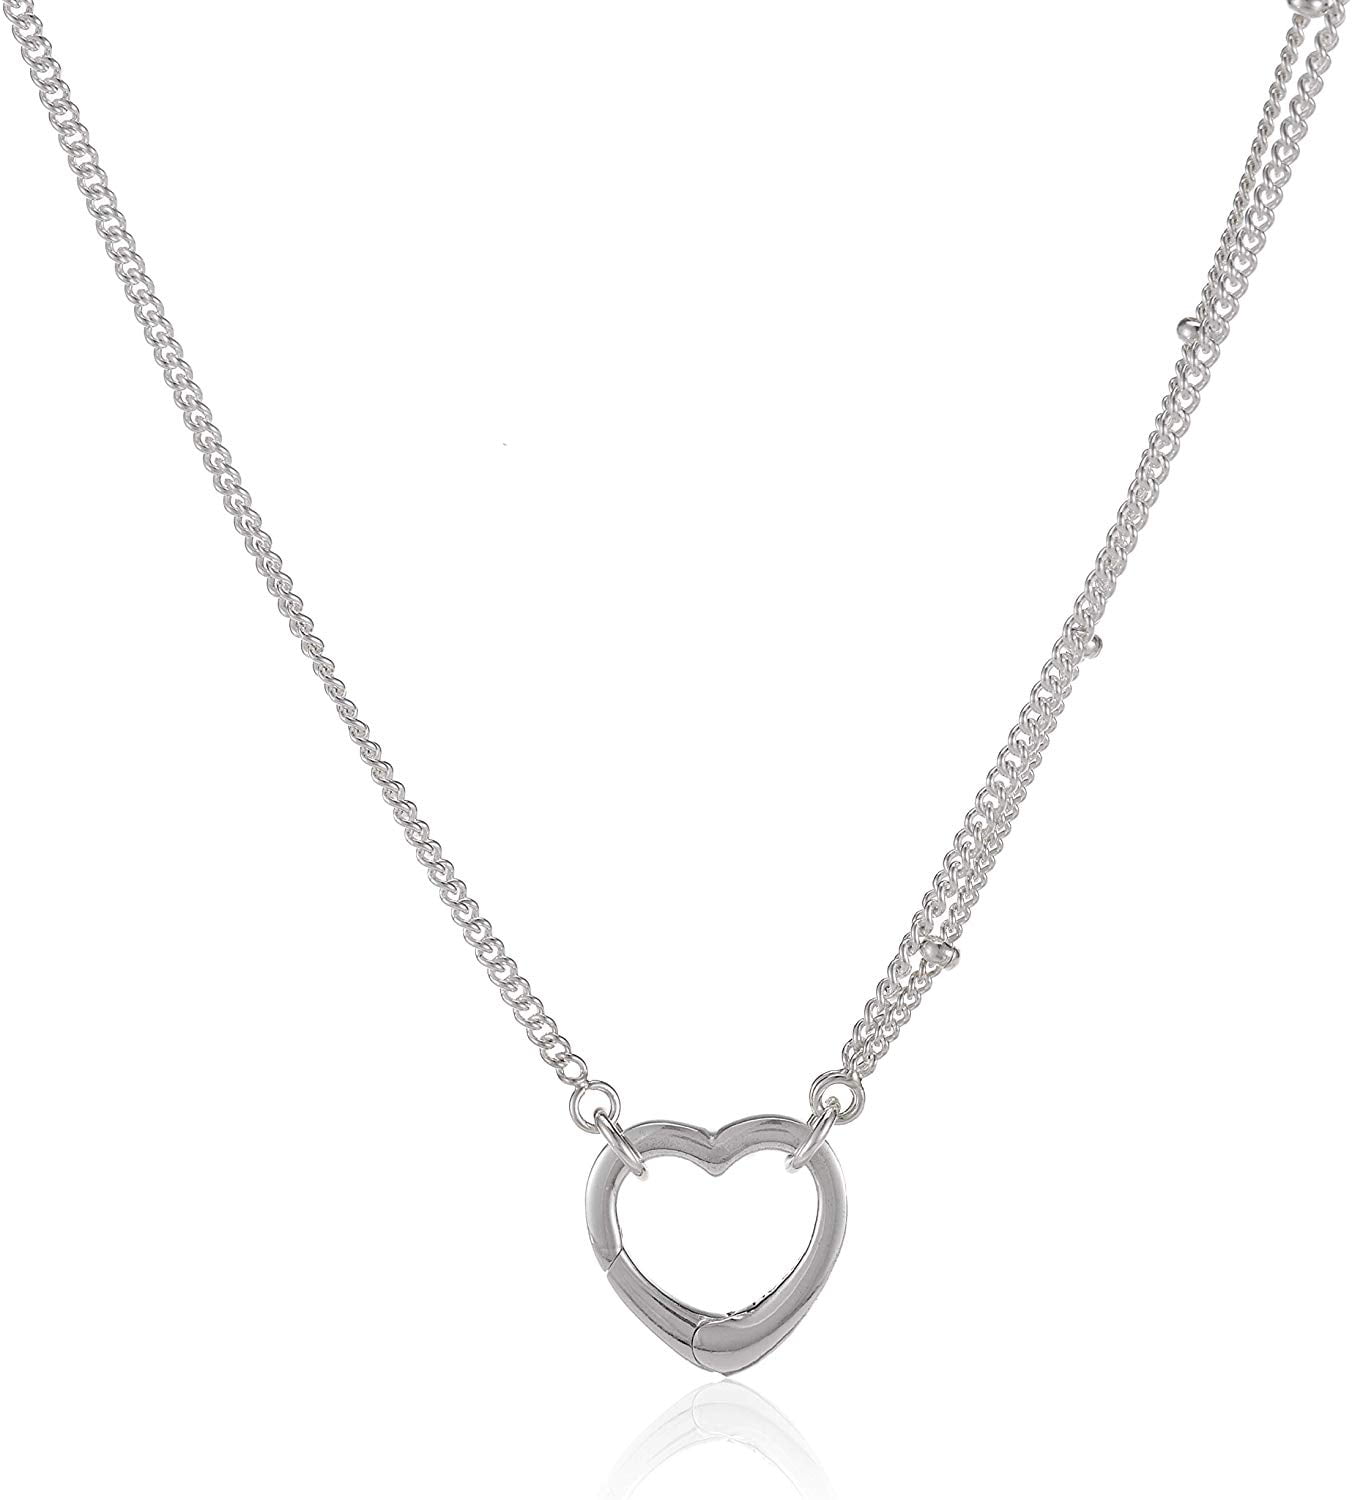 Pandora Heart Family Tree Collier Necklace - Anfesas Jewelers